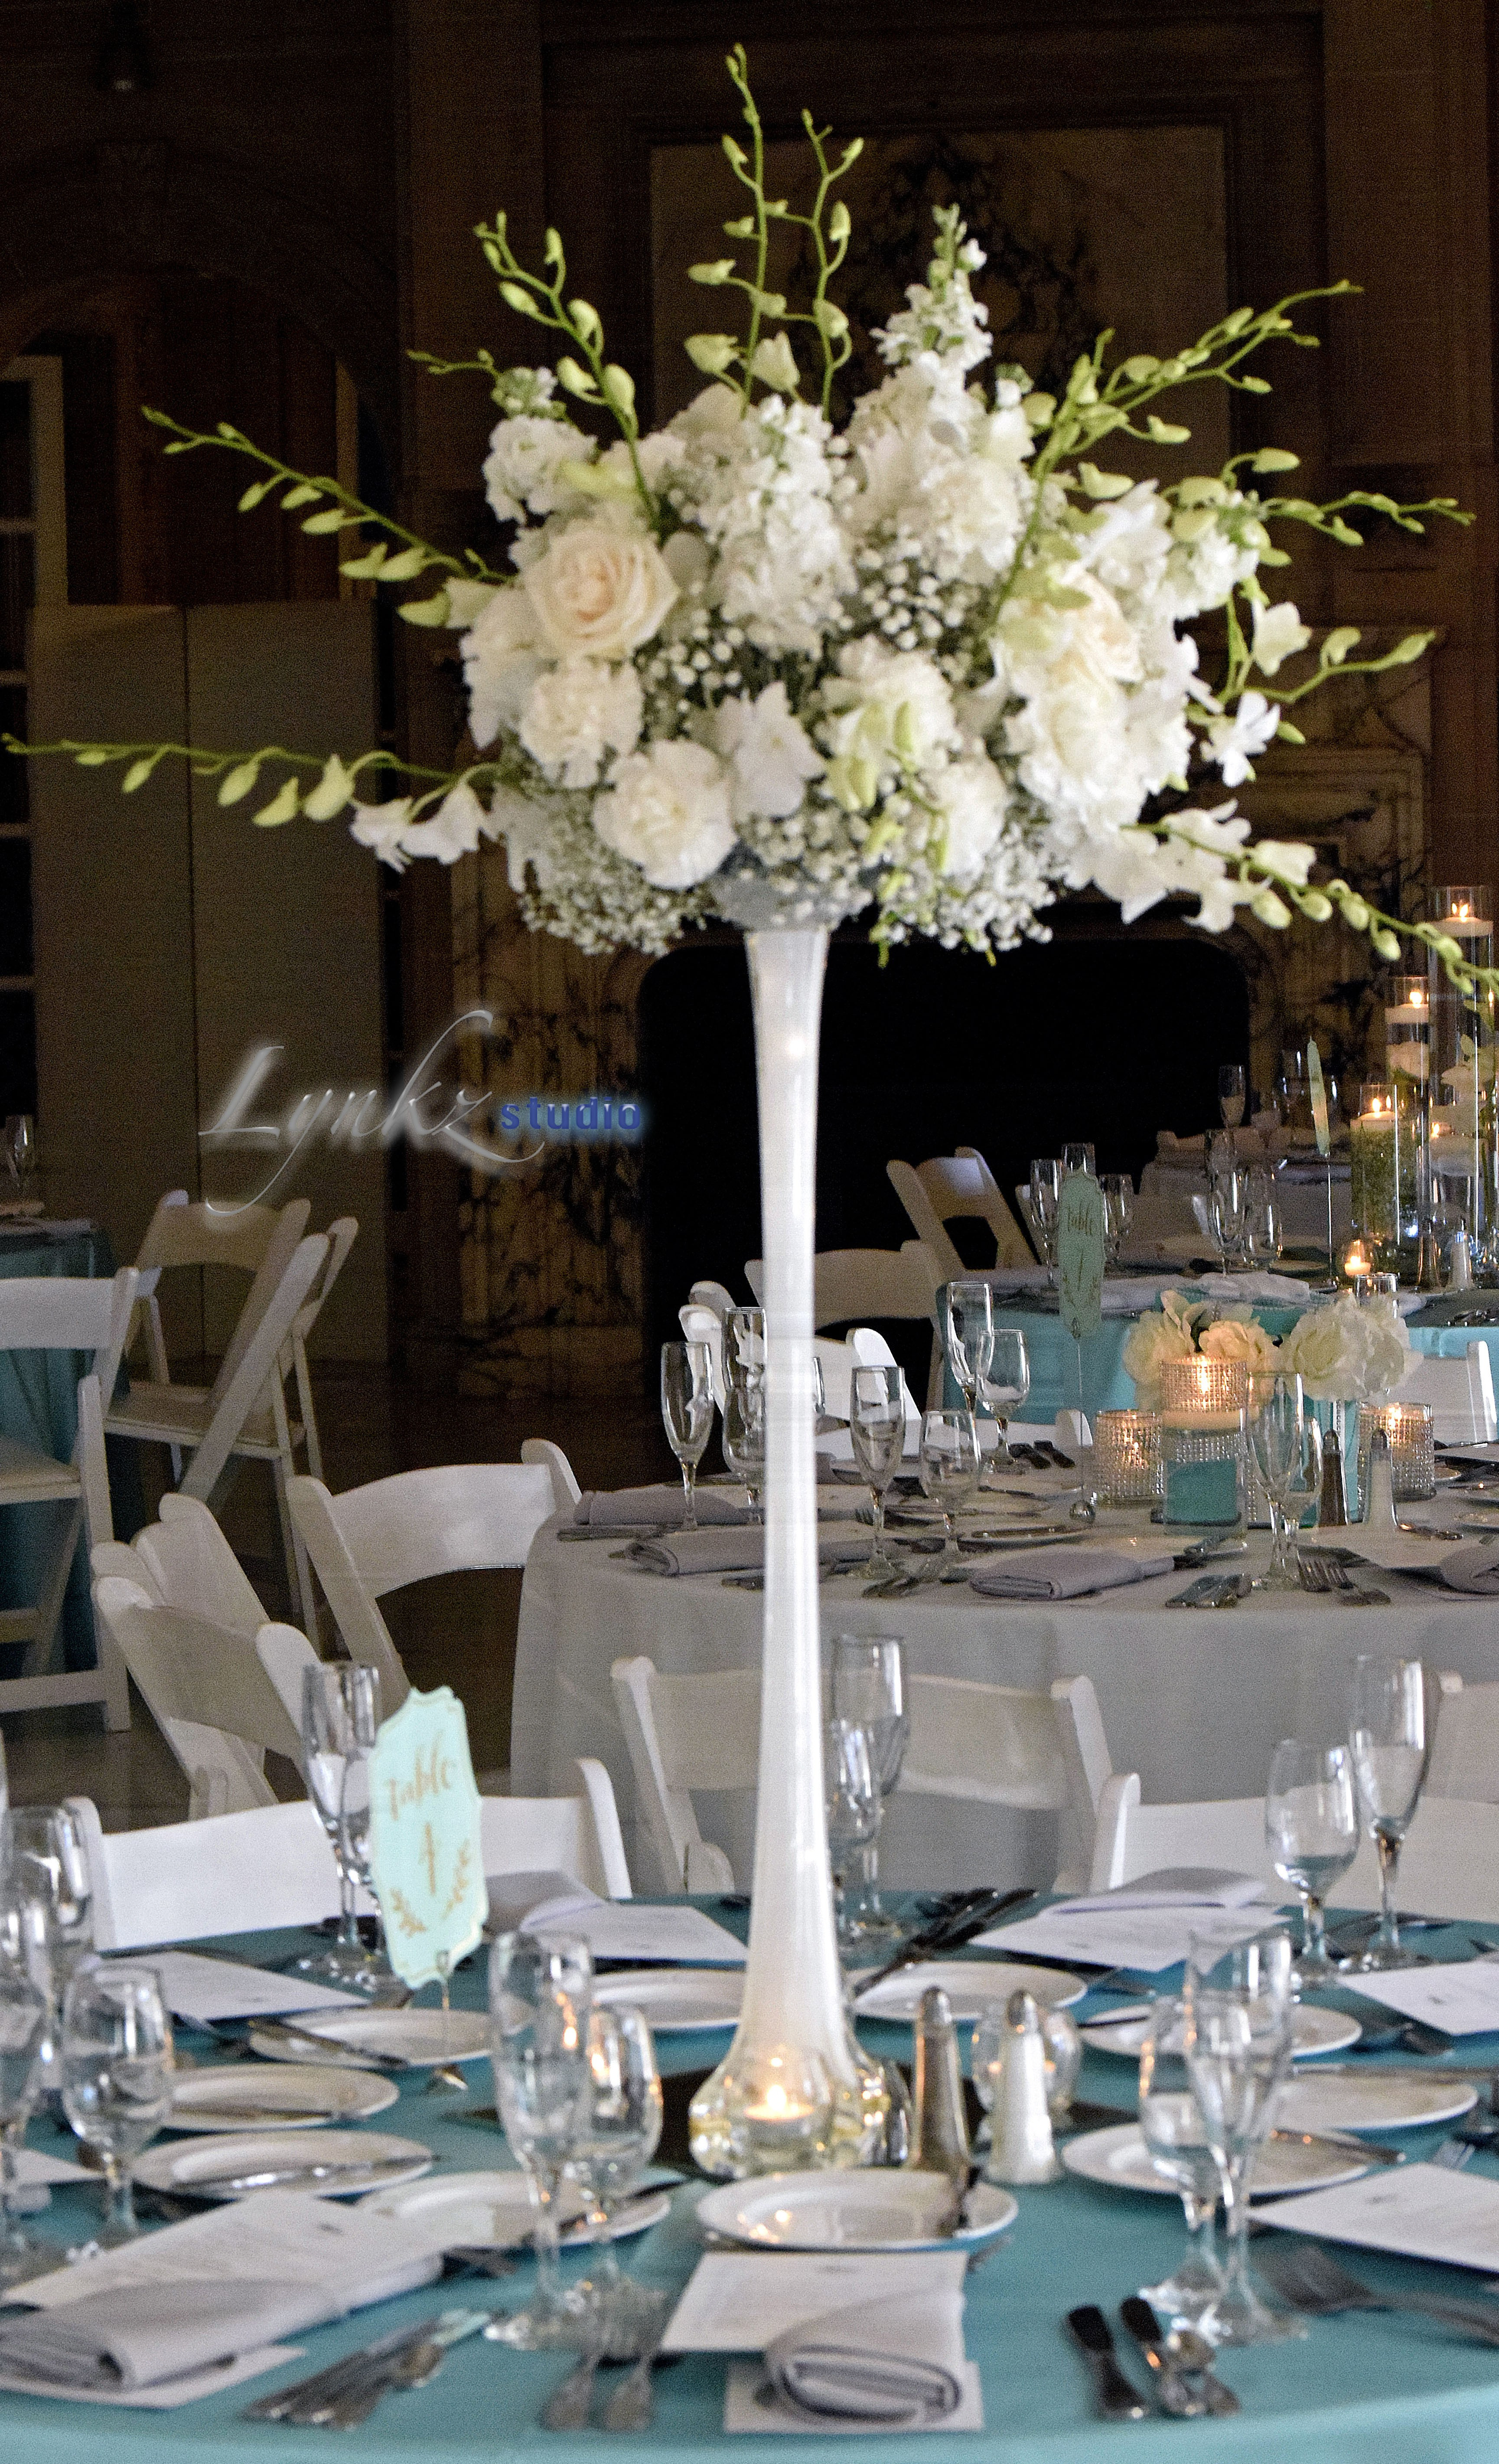 22 attractive Tall Vase White Flower Arrangements 2022 free download tall vase white flower arrangements of decorating ideas for tall vases luxury guest table centerpiece on with regard to decorating ideas for tall vases luxury guest table centerpiece on eiff